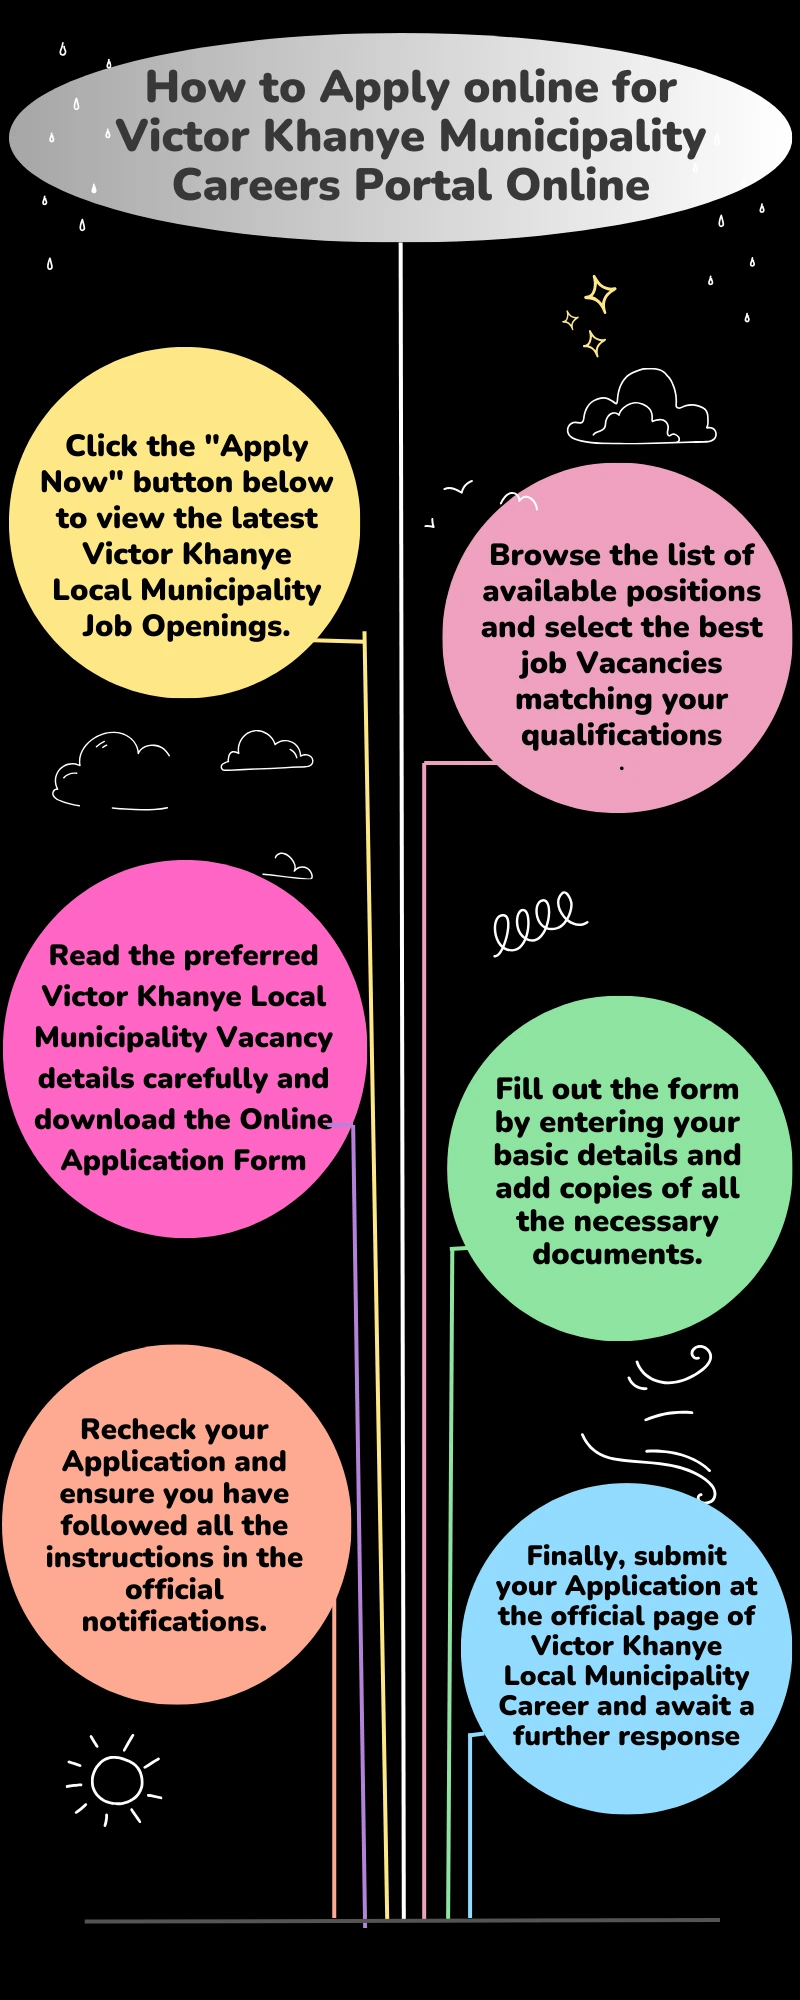 How to Apply online for Victor Khanye Municipality Careers Portal Online